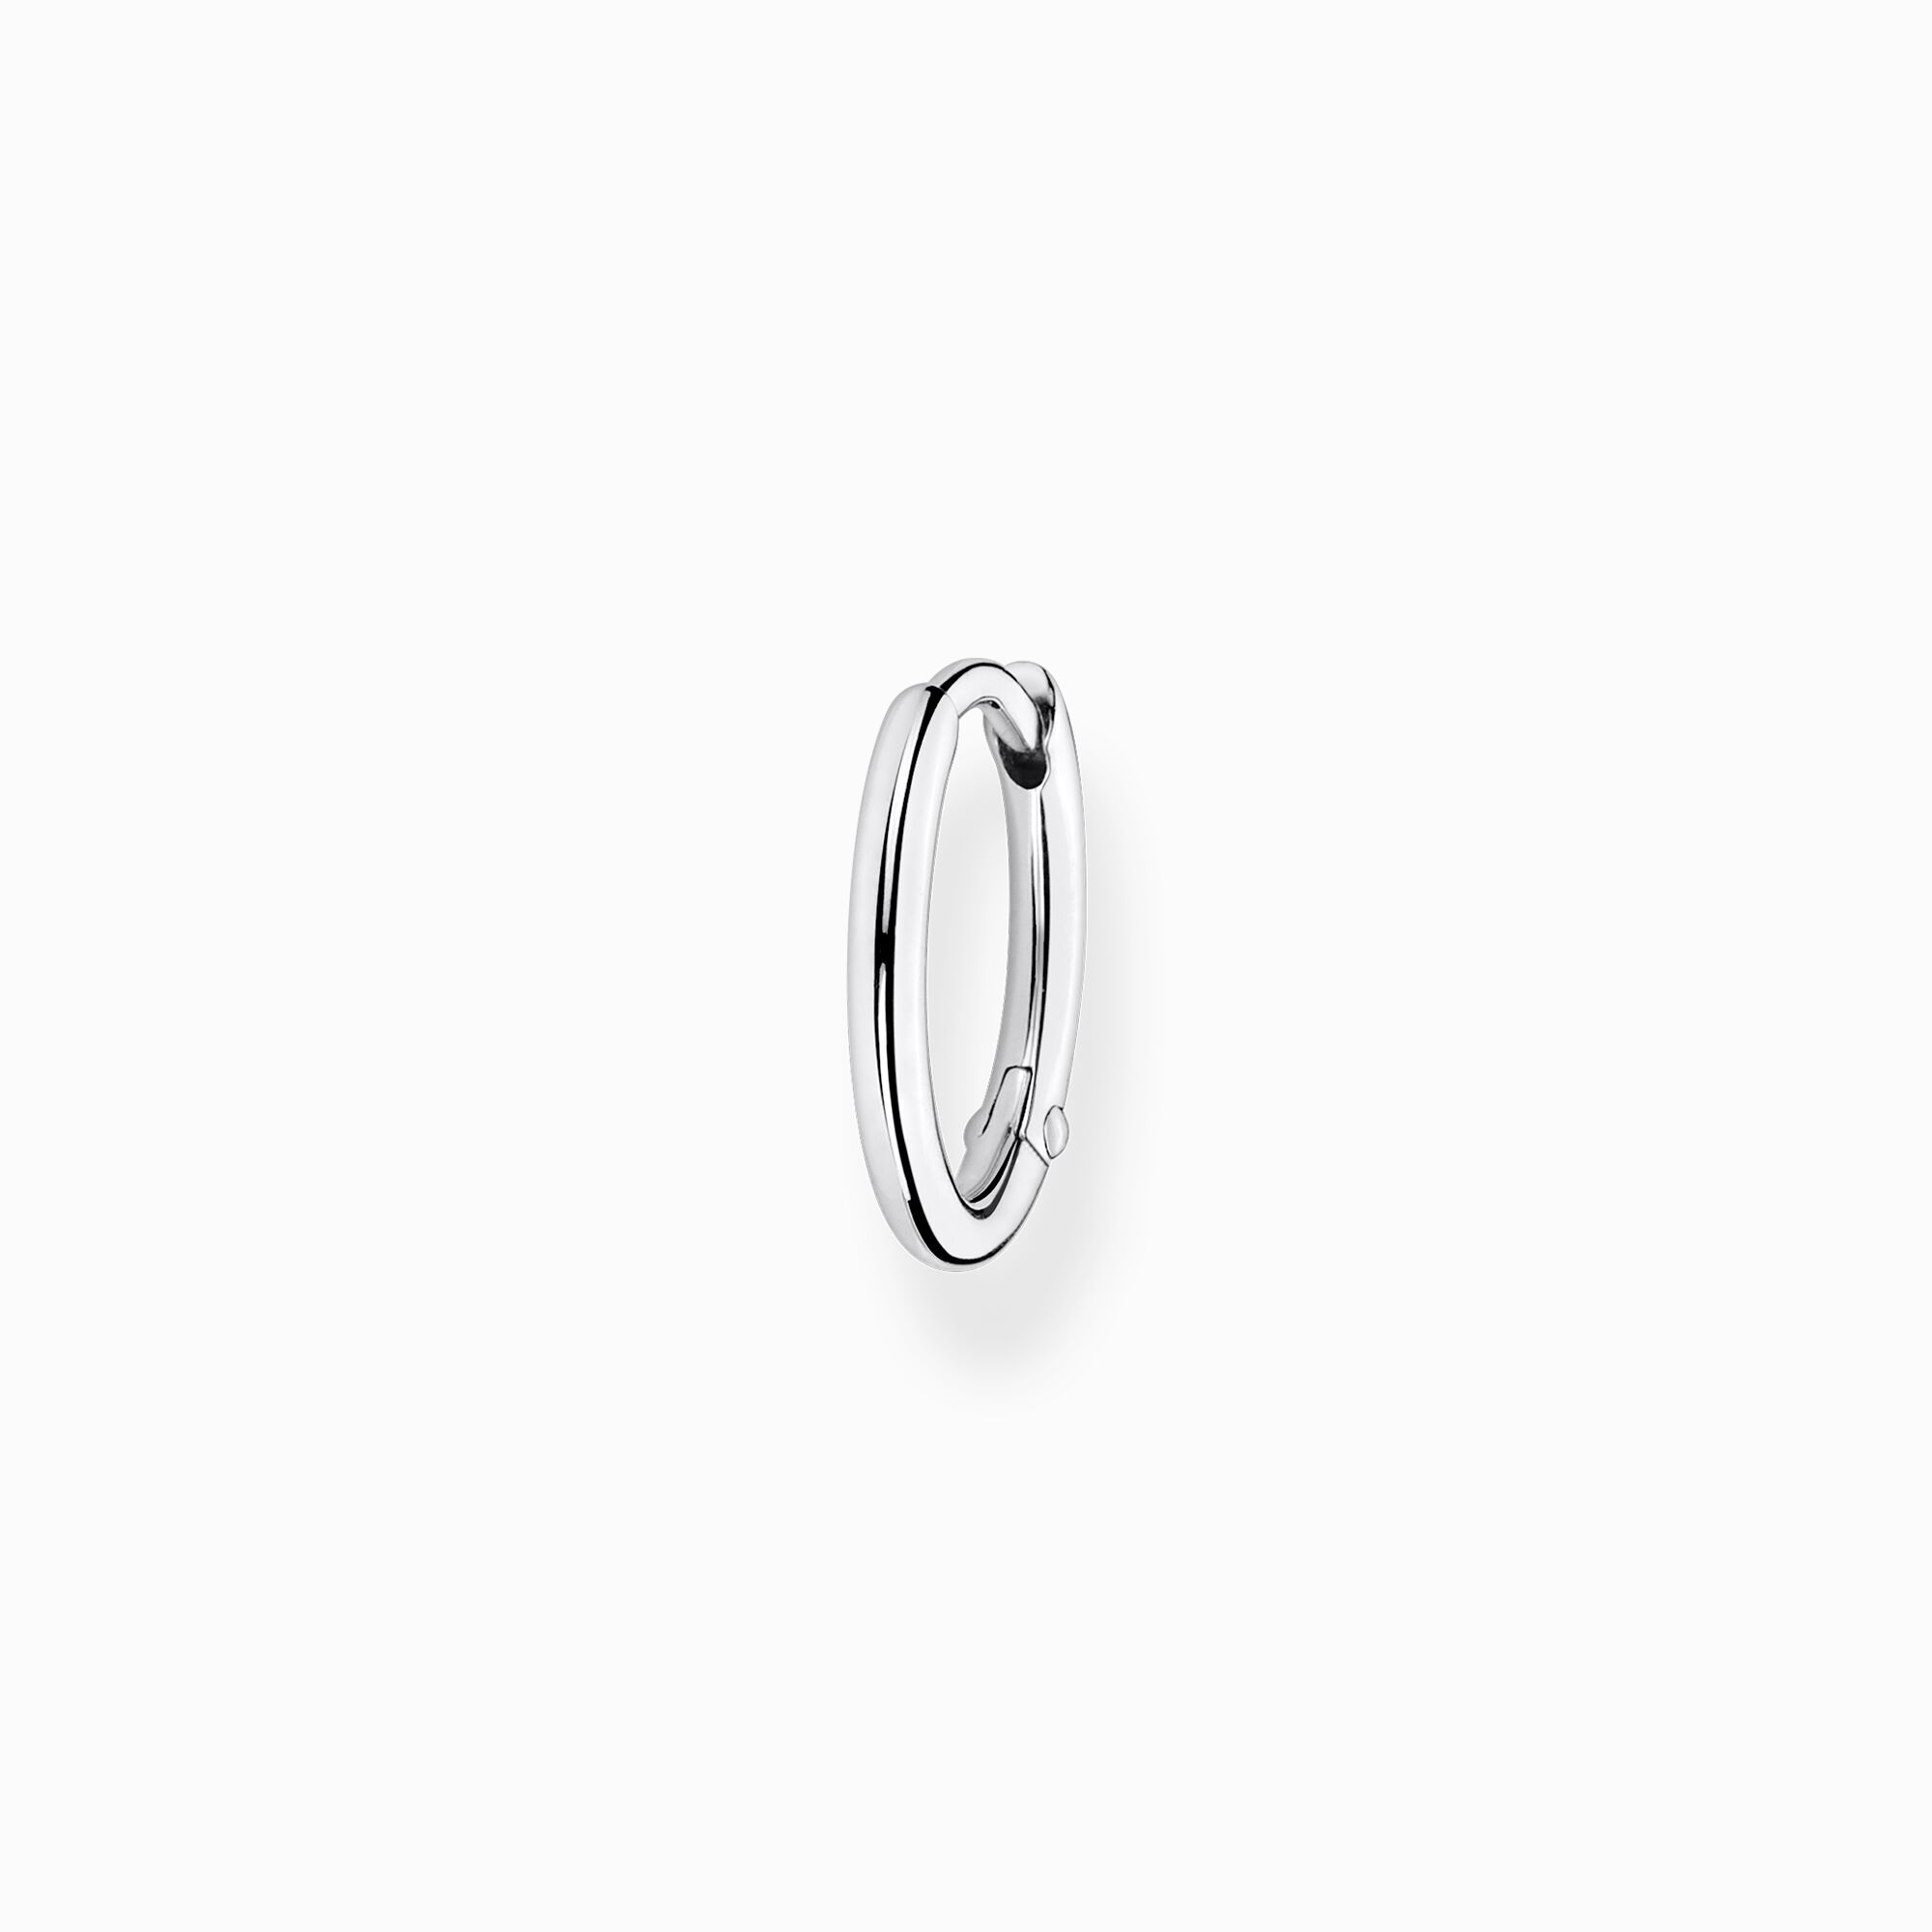 Single hoop earring classic silver from the Charming Collection collection in the THOMAS SABO online store